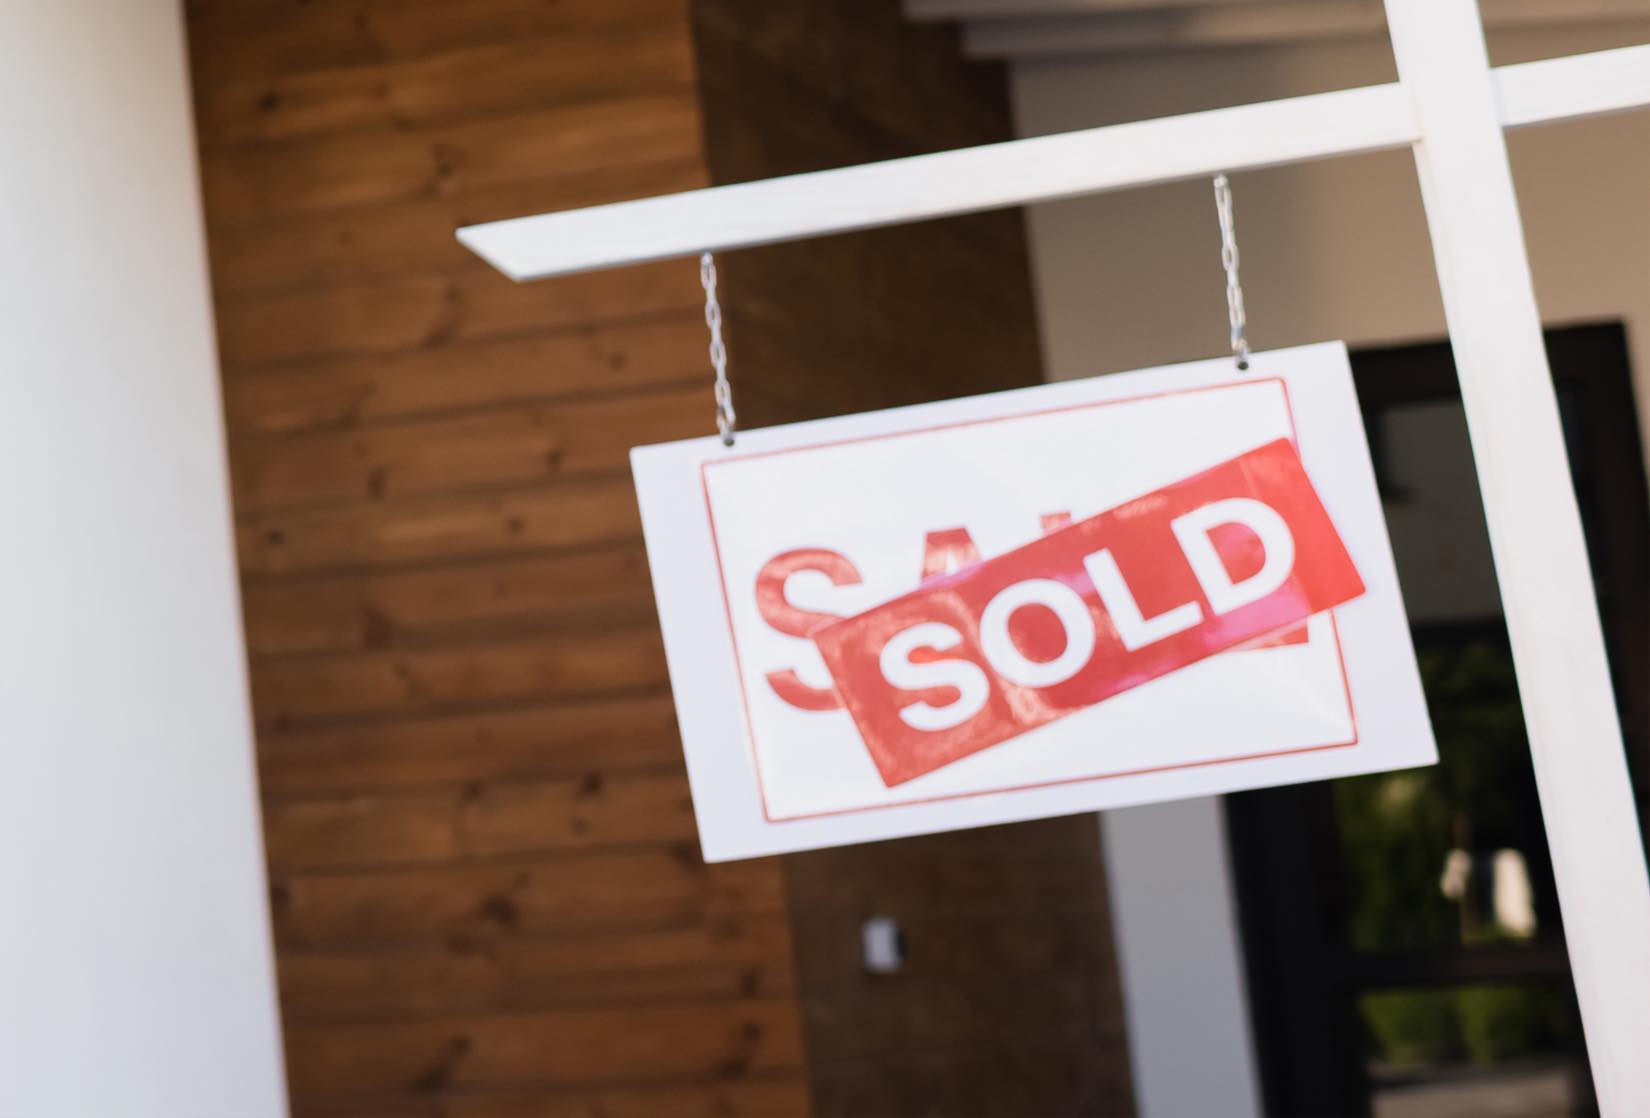 Sold sign on Burnaby home after sale with Burnaby realtor.